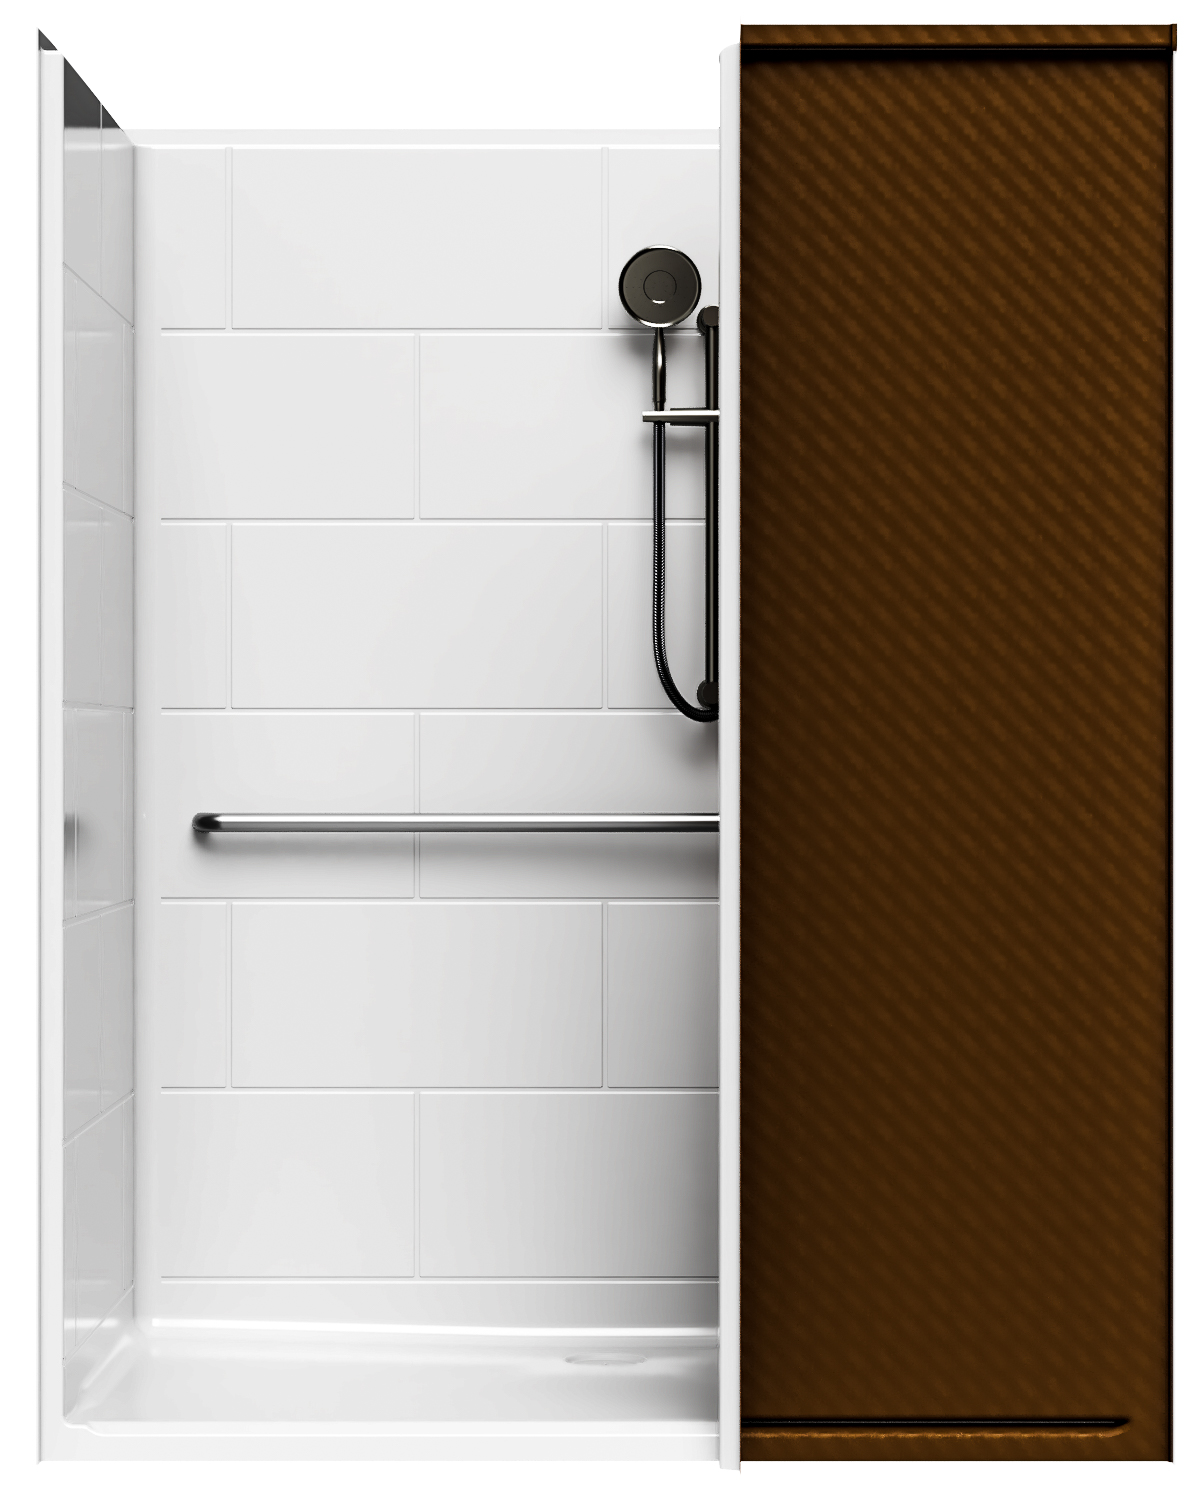 5' Alternate Roll-In Shower with Simulated Tile